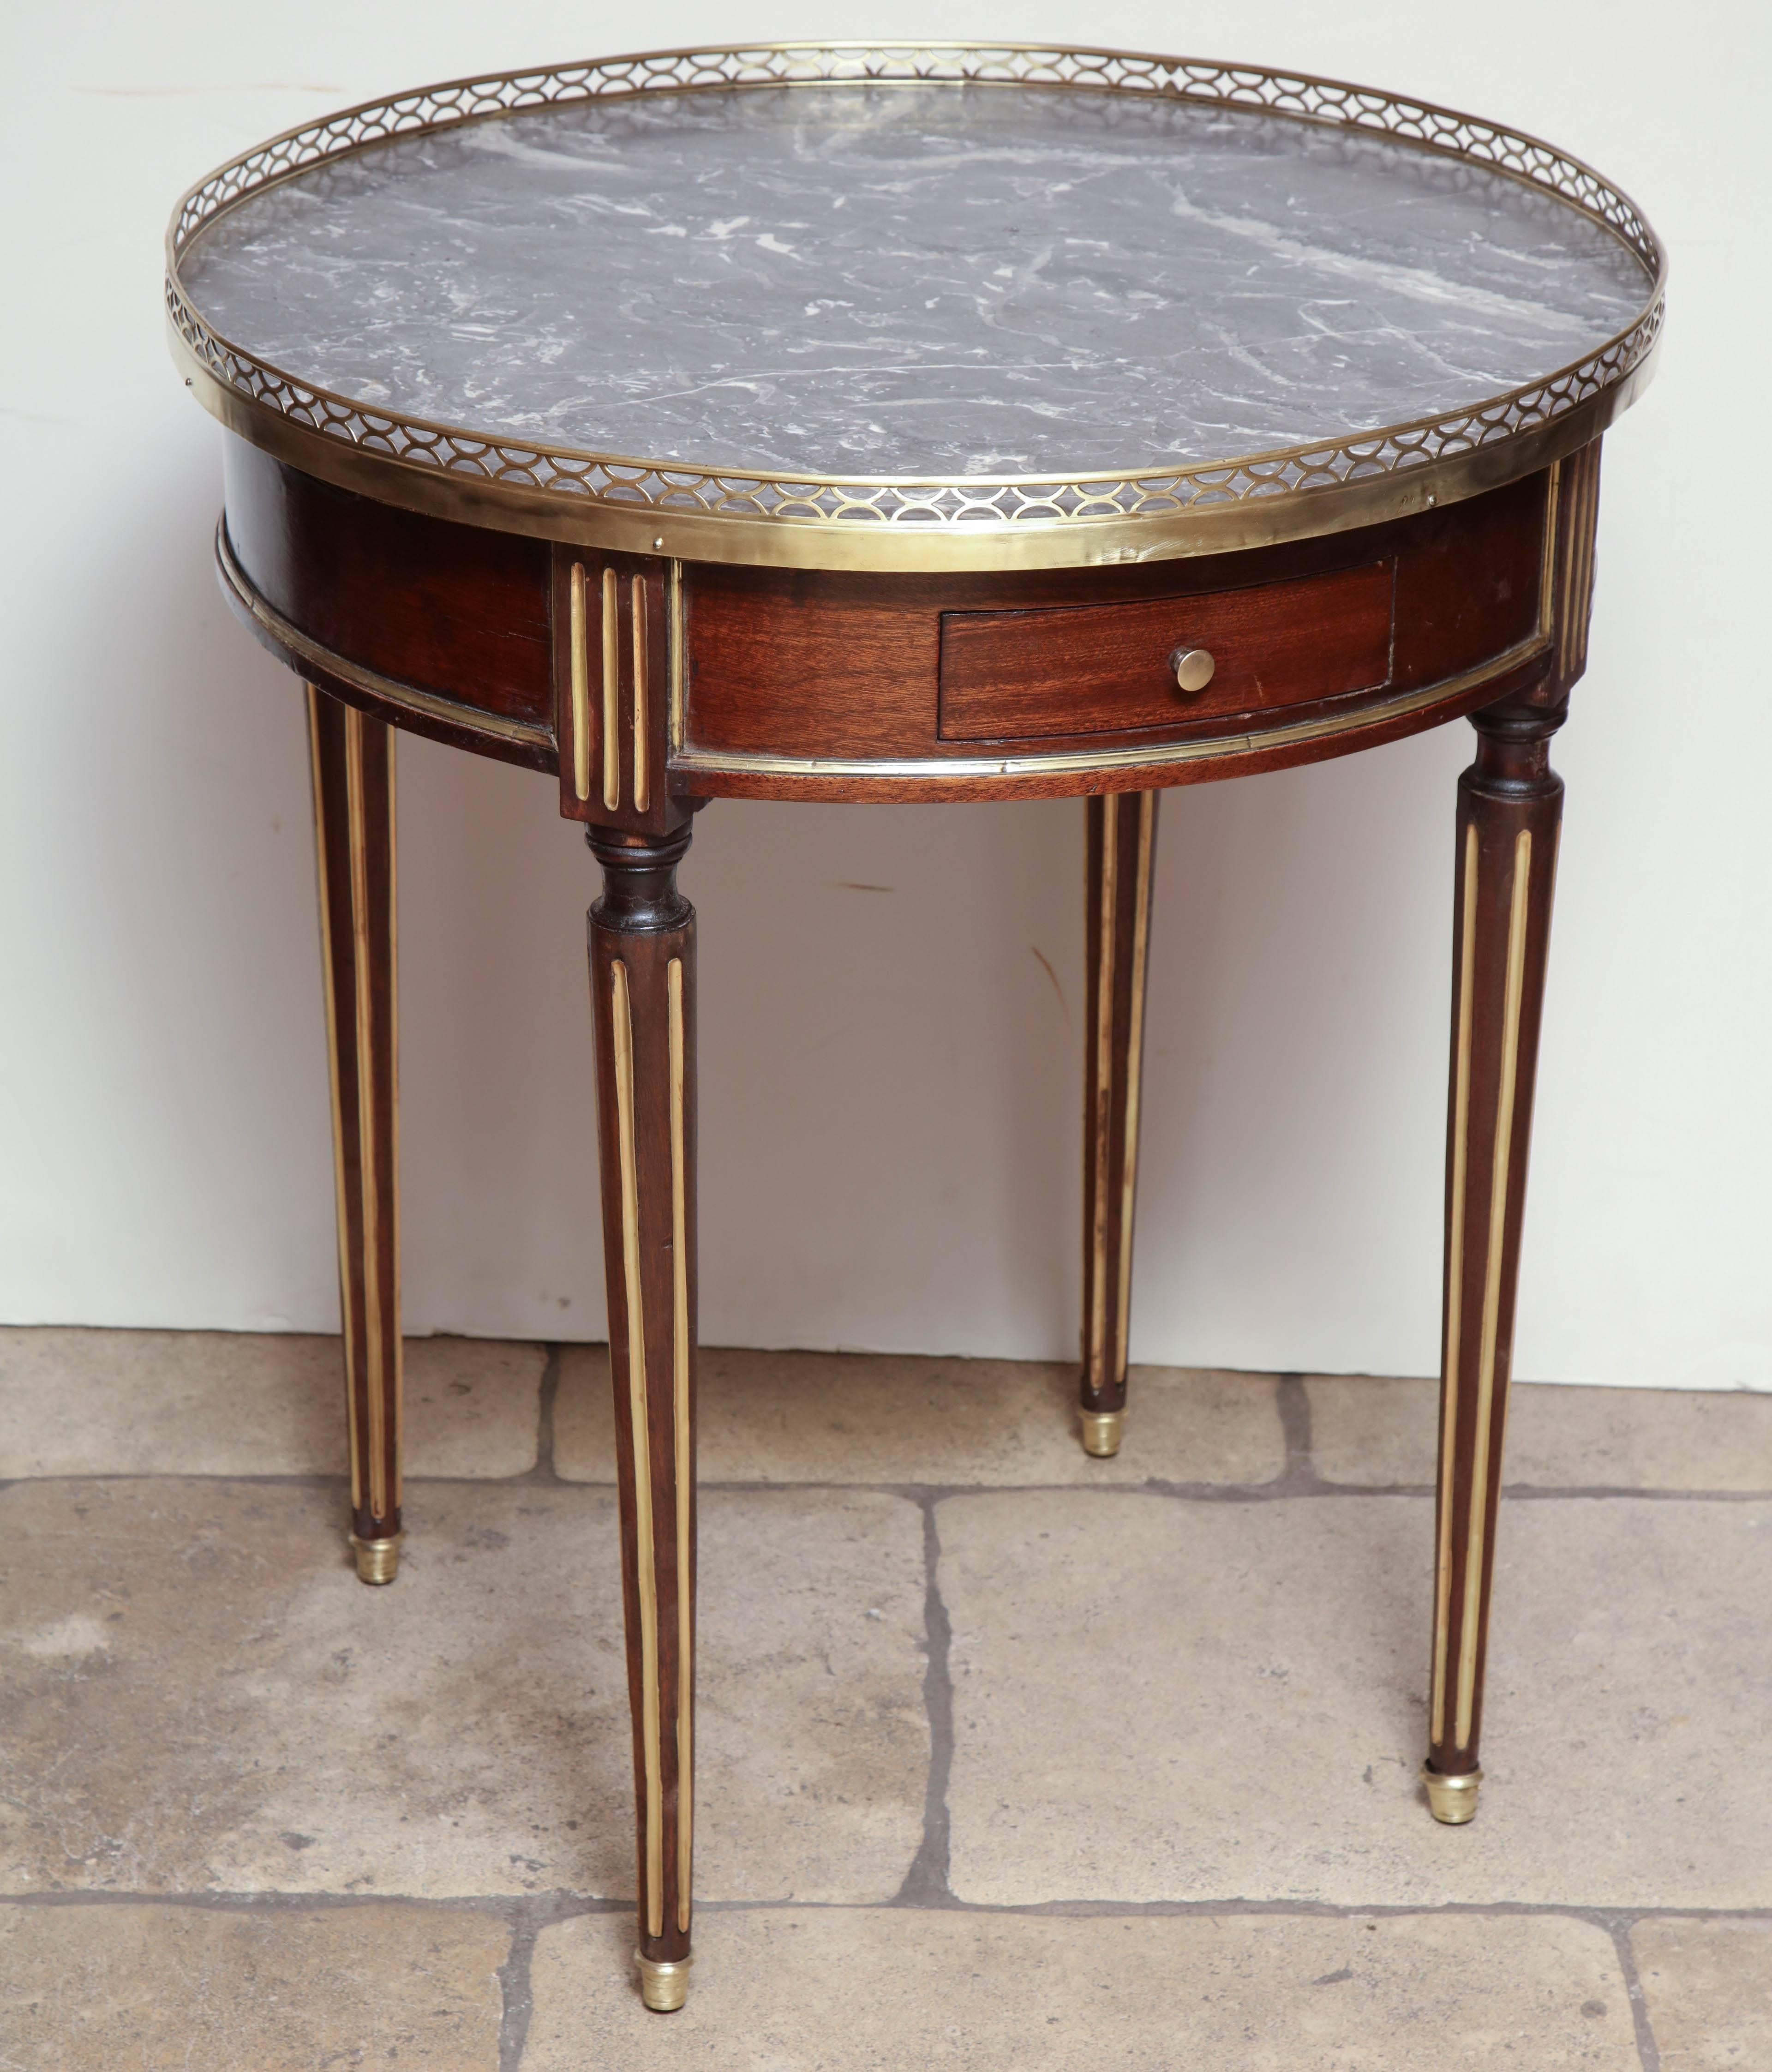 French Louis XVI marble-top pierced bronze gallery Boulliotte table with brass and gilded trim with drawer and candle slides.